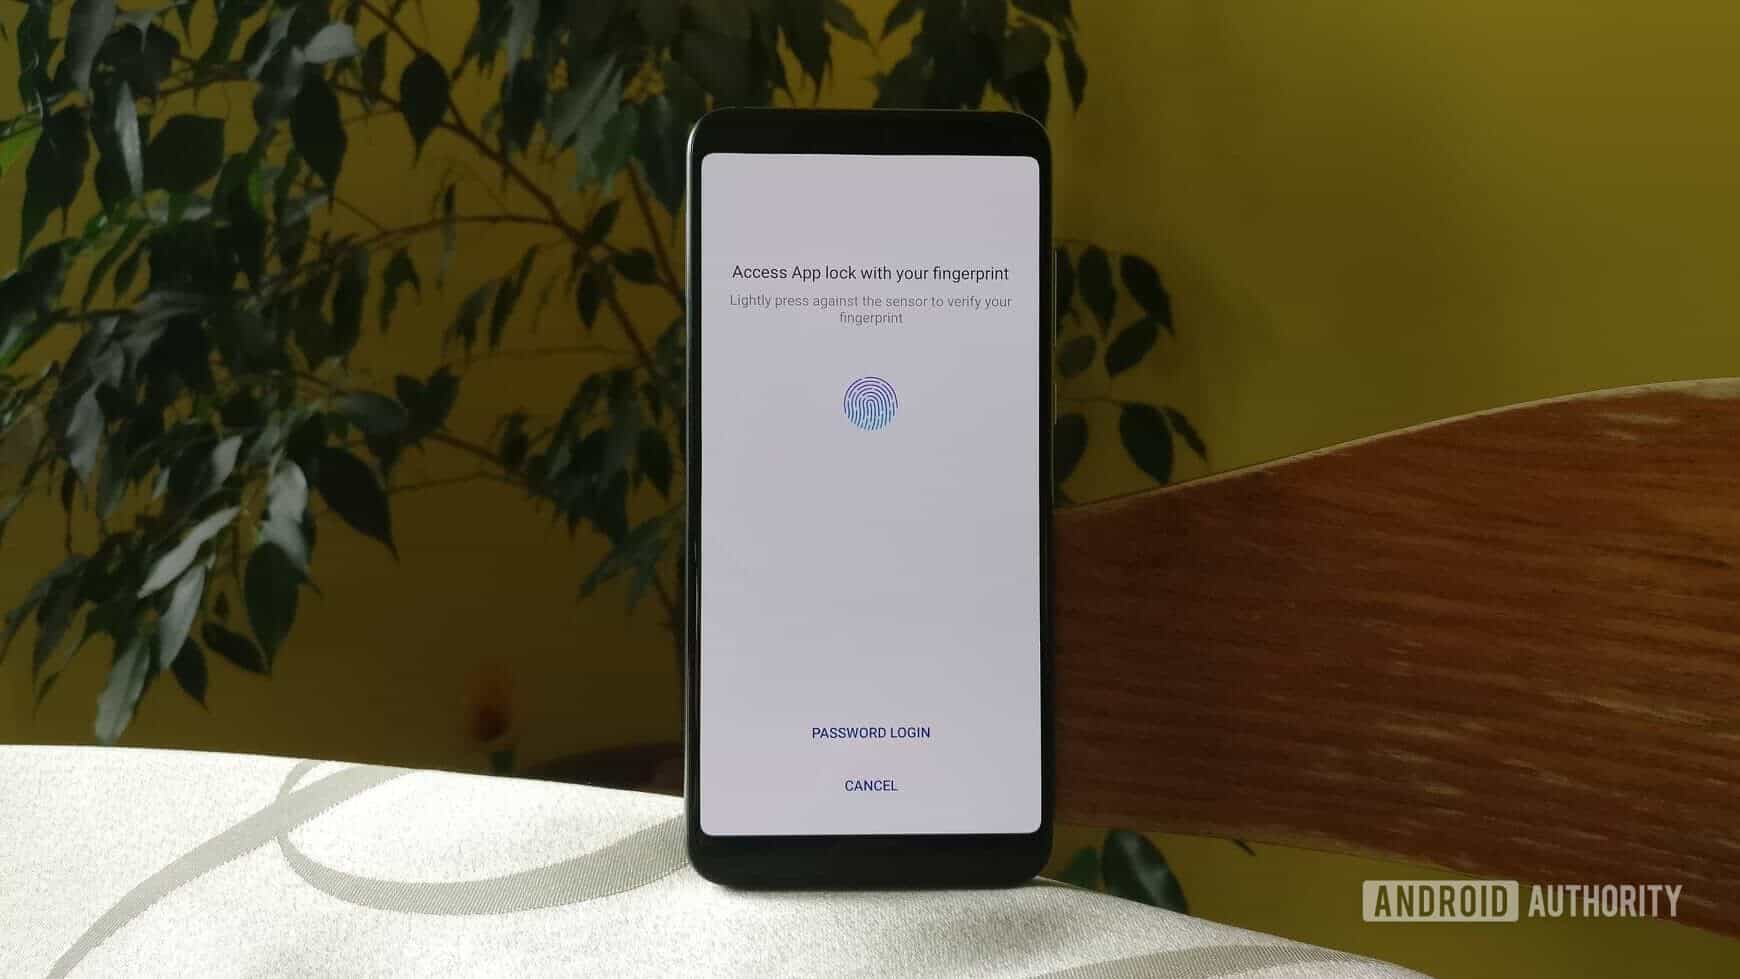 Huawwei P20 Pro Emui App lock feature - what is EMUI